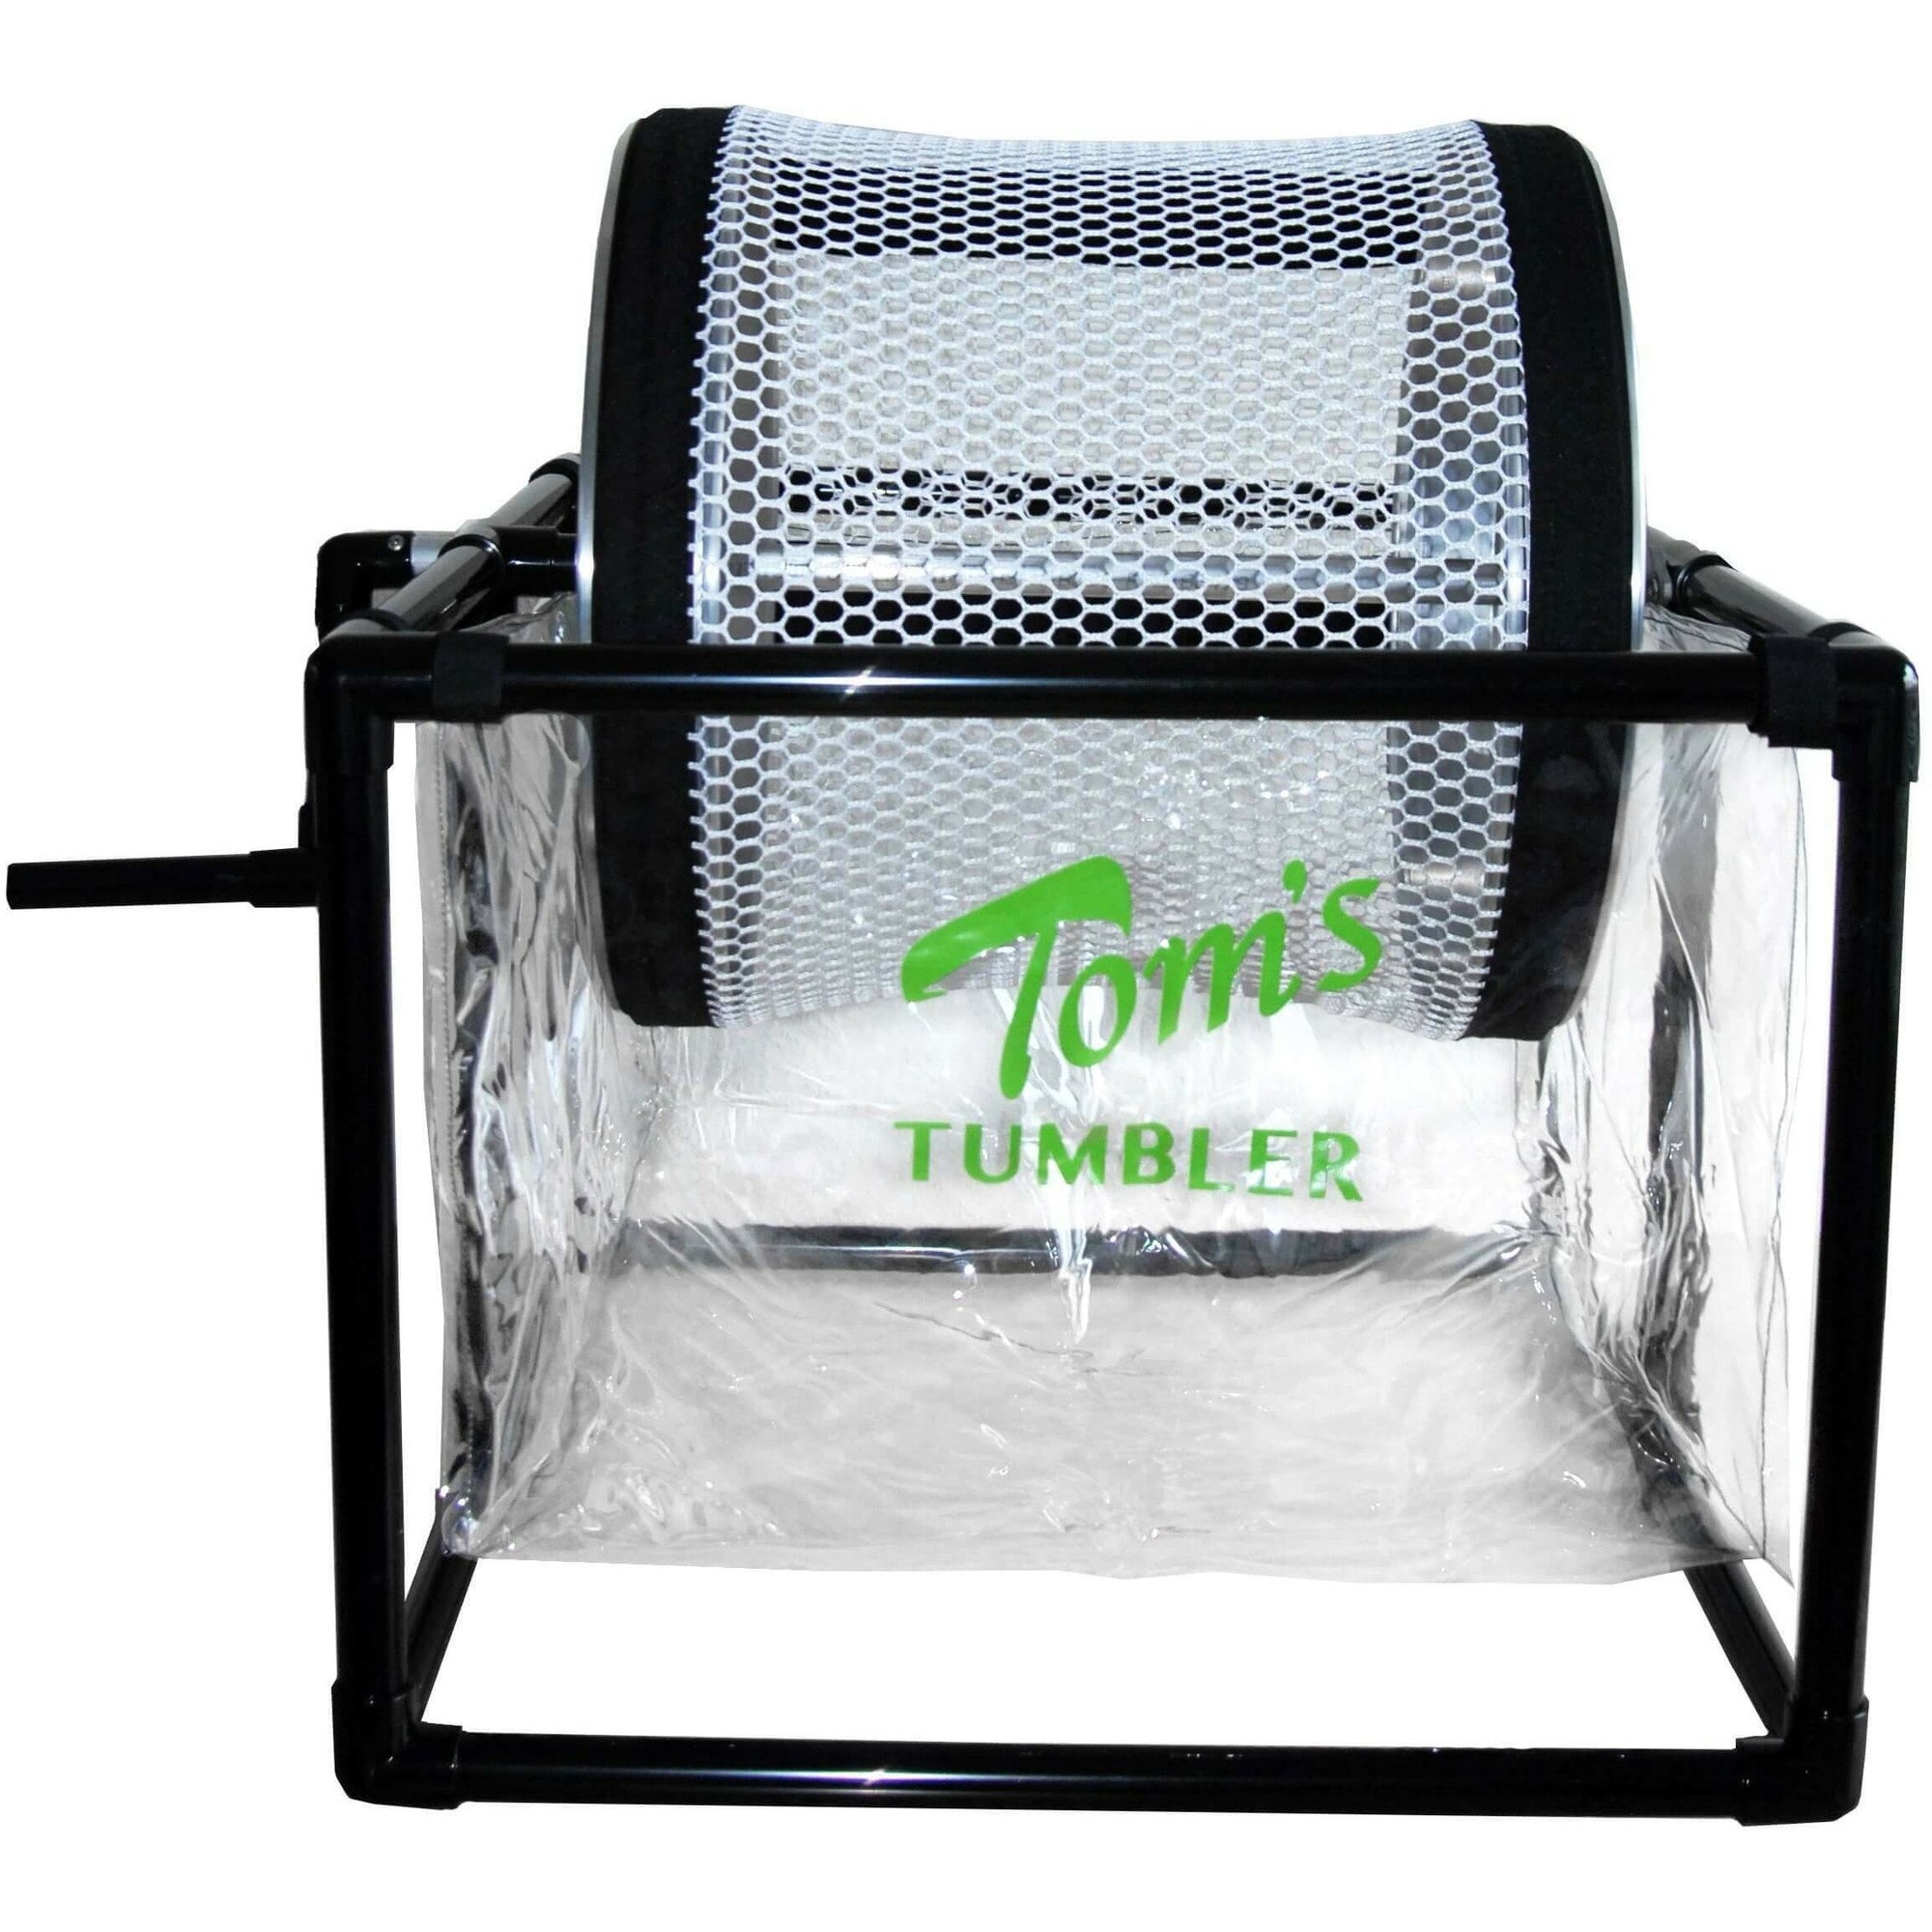 Tom's Tumble Trimmer Toms Tumble Trimmer 1600 Hand Crank Dry Bud Trimming Machine Main